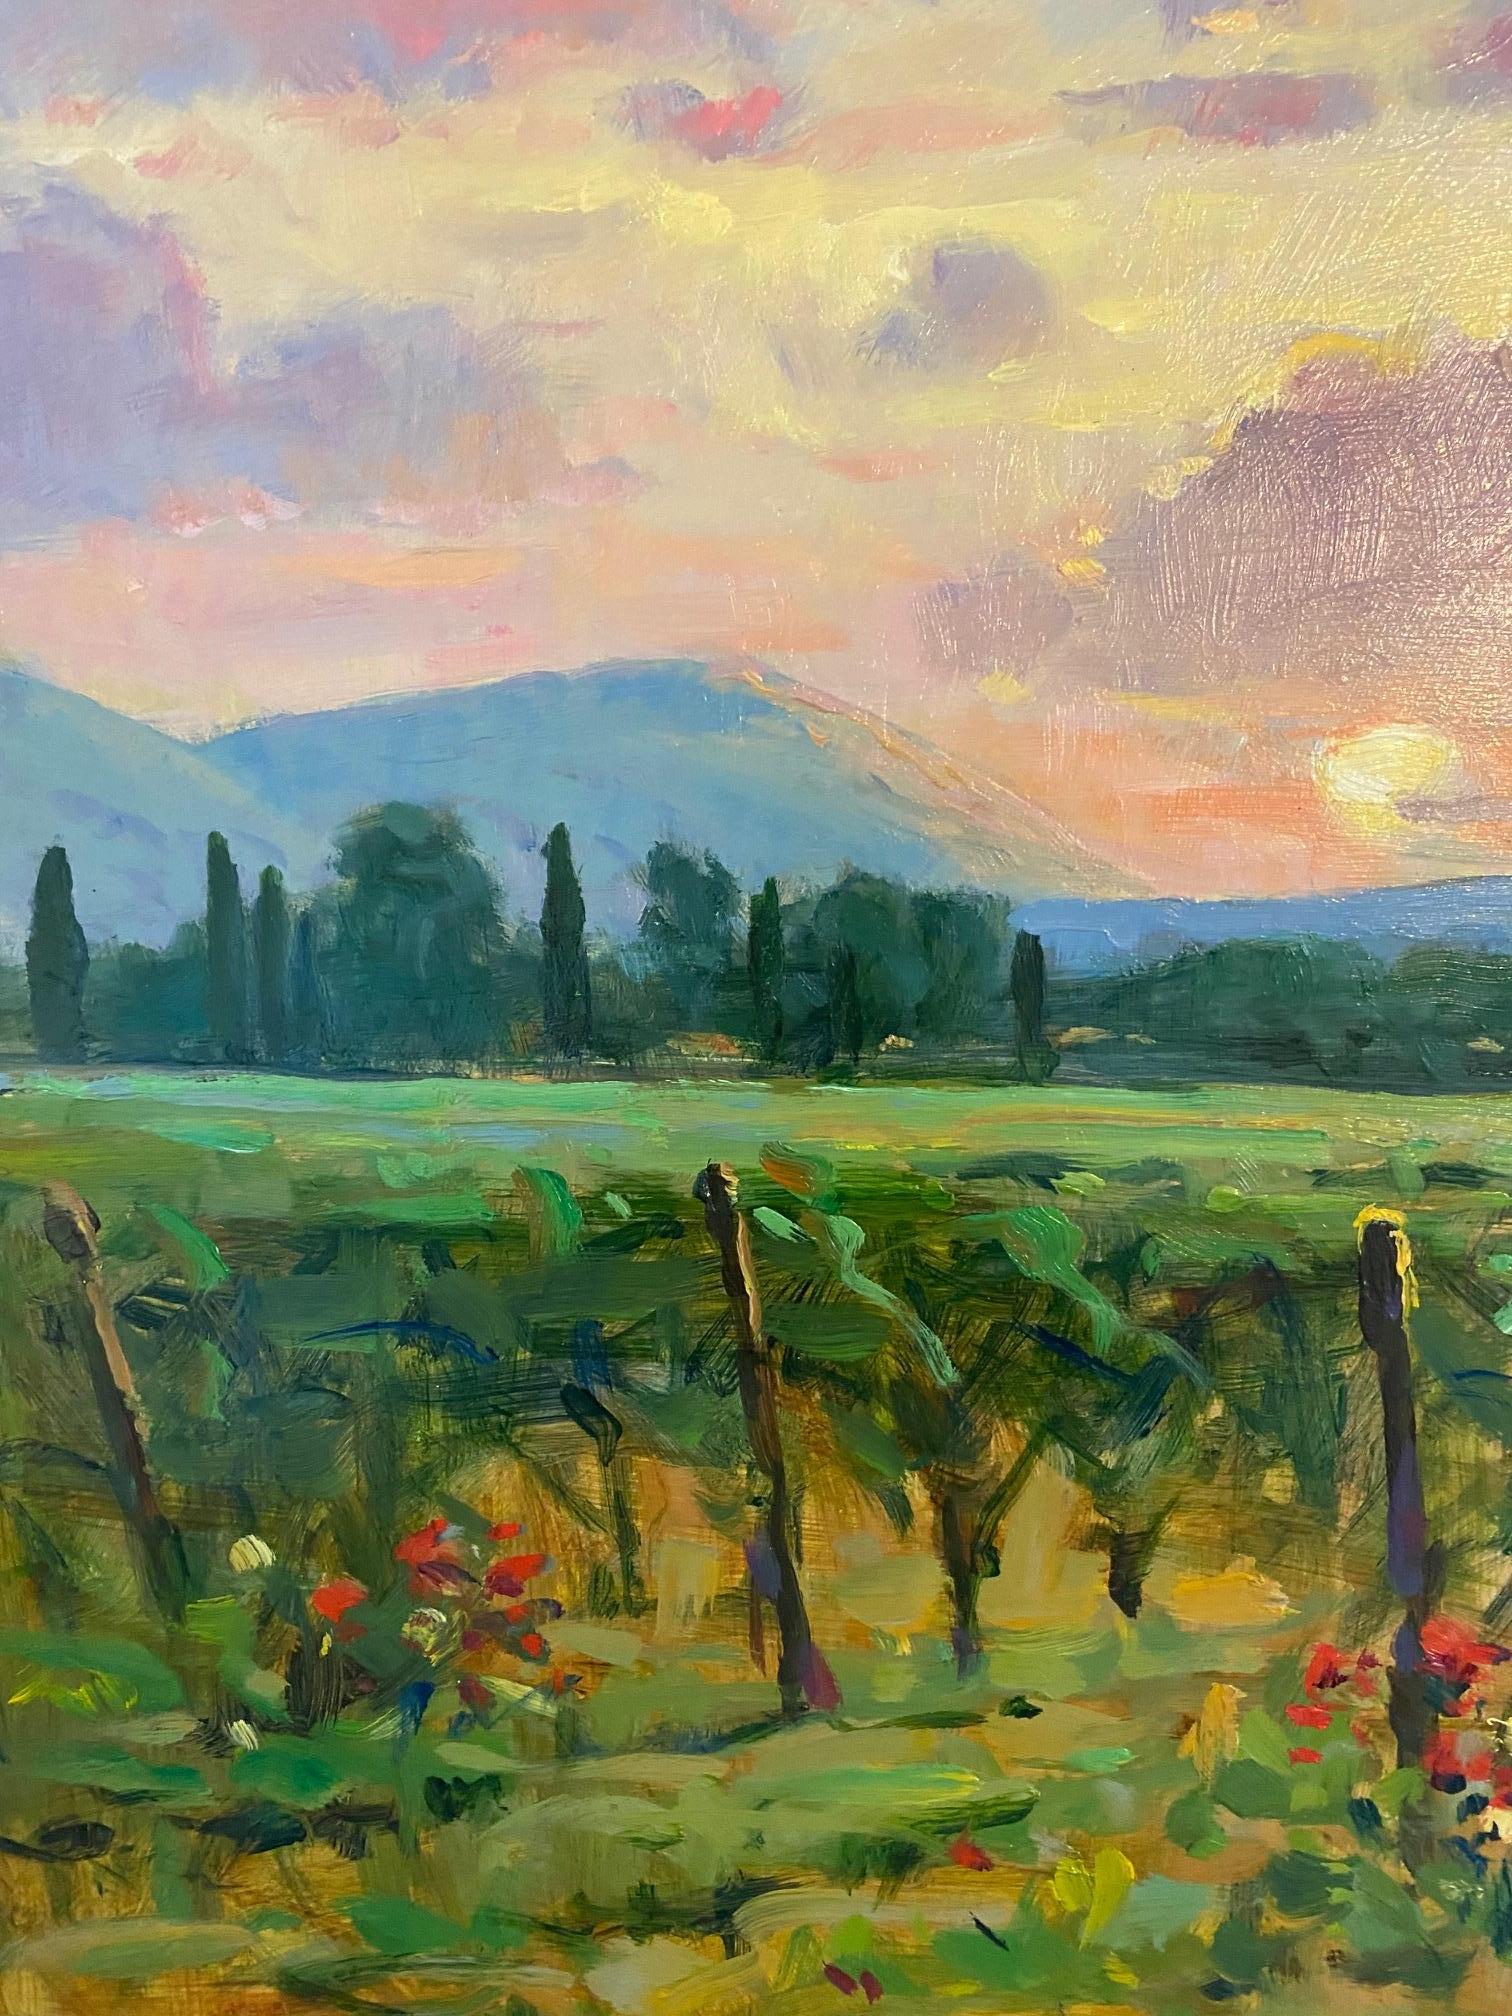 Lyrical Light in Les Baux, original French impressionist landscape oil painting - Impressionist Painting by Jim Rodgers